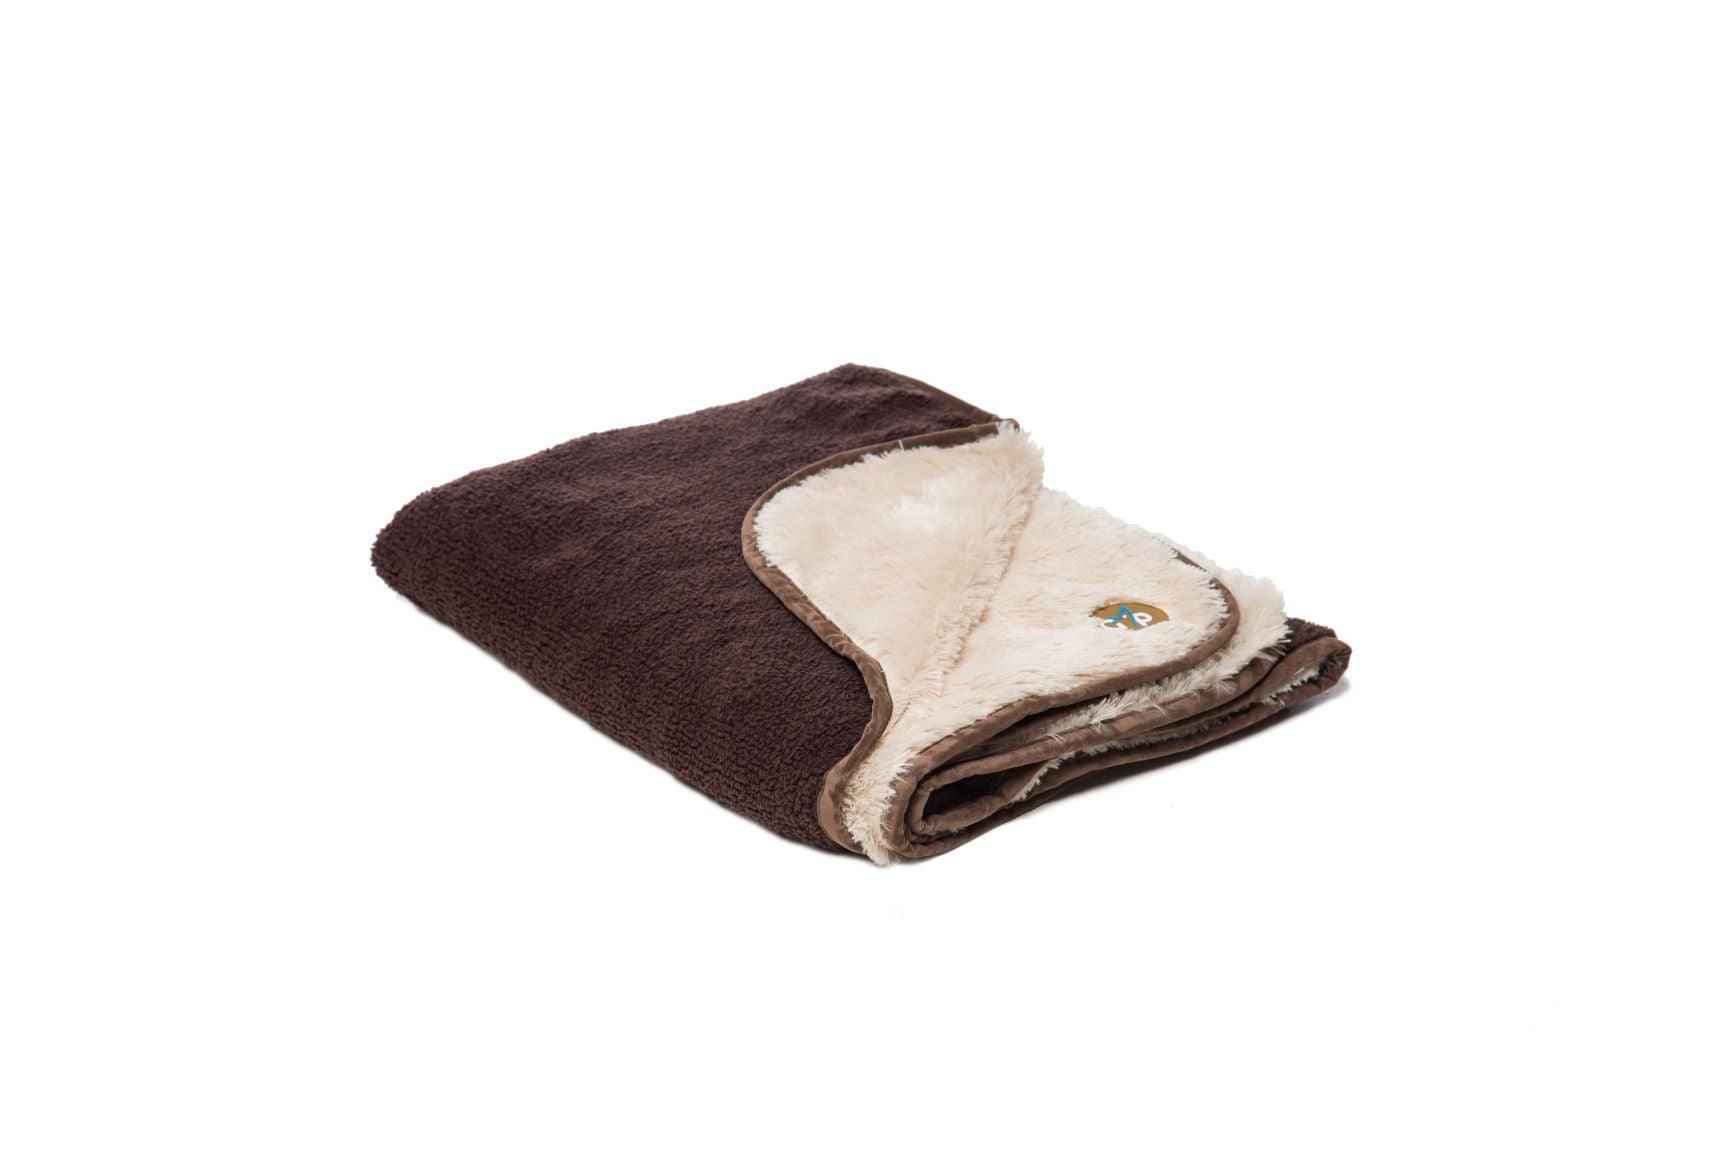 View Nordic Blanket Brown Double Sided Large 150x100cm information